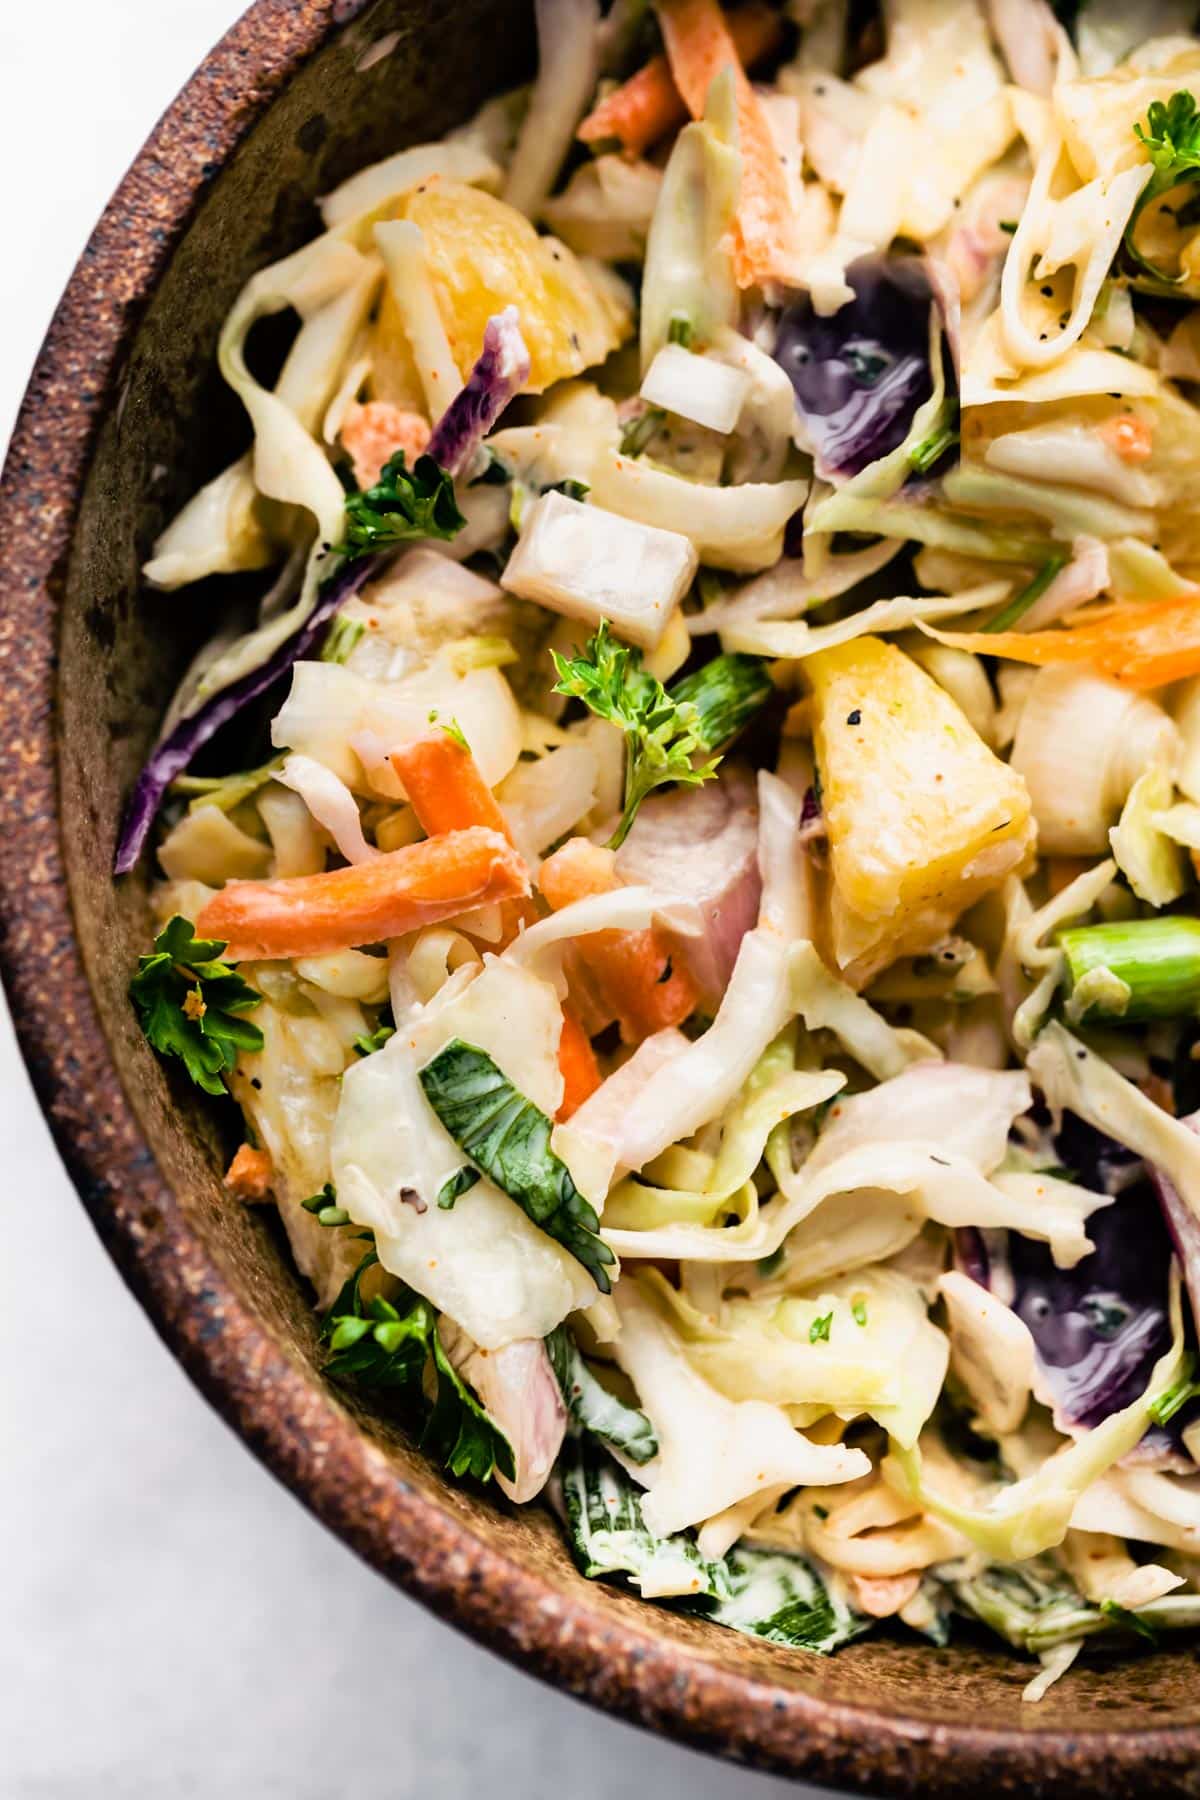 Overhead image of pineapple coleslaw made with vegan buttermilk.